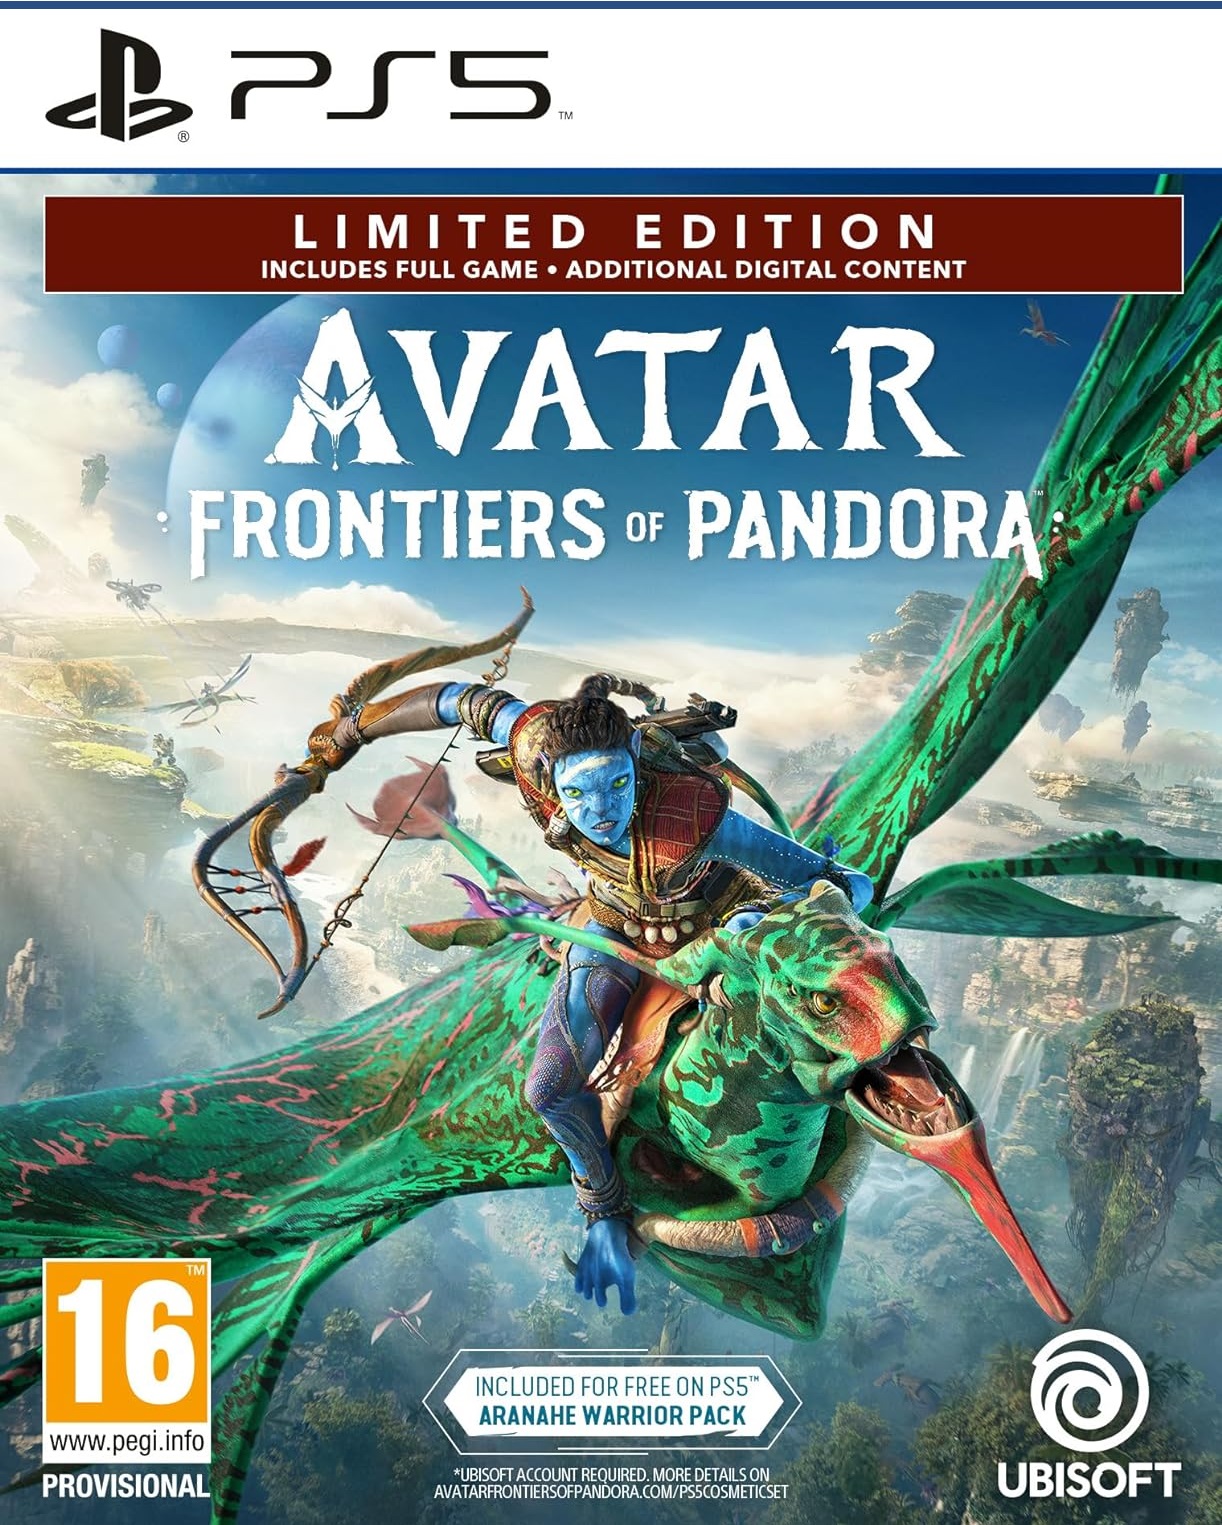 Avatar Frontiers of Pandora Limited Edition - PS5